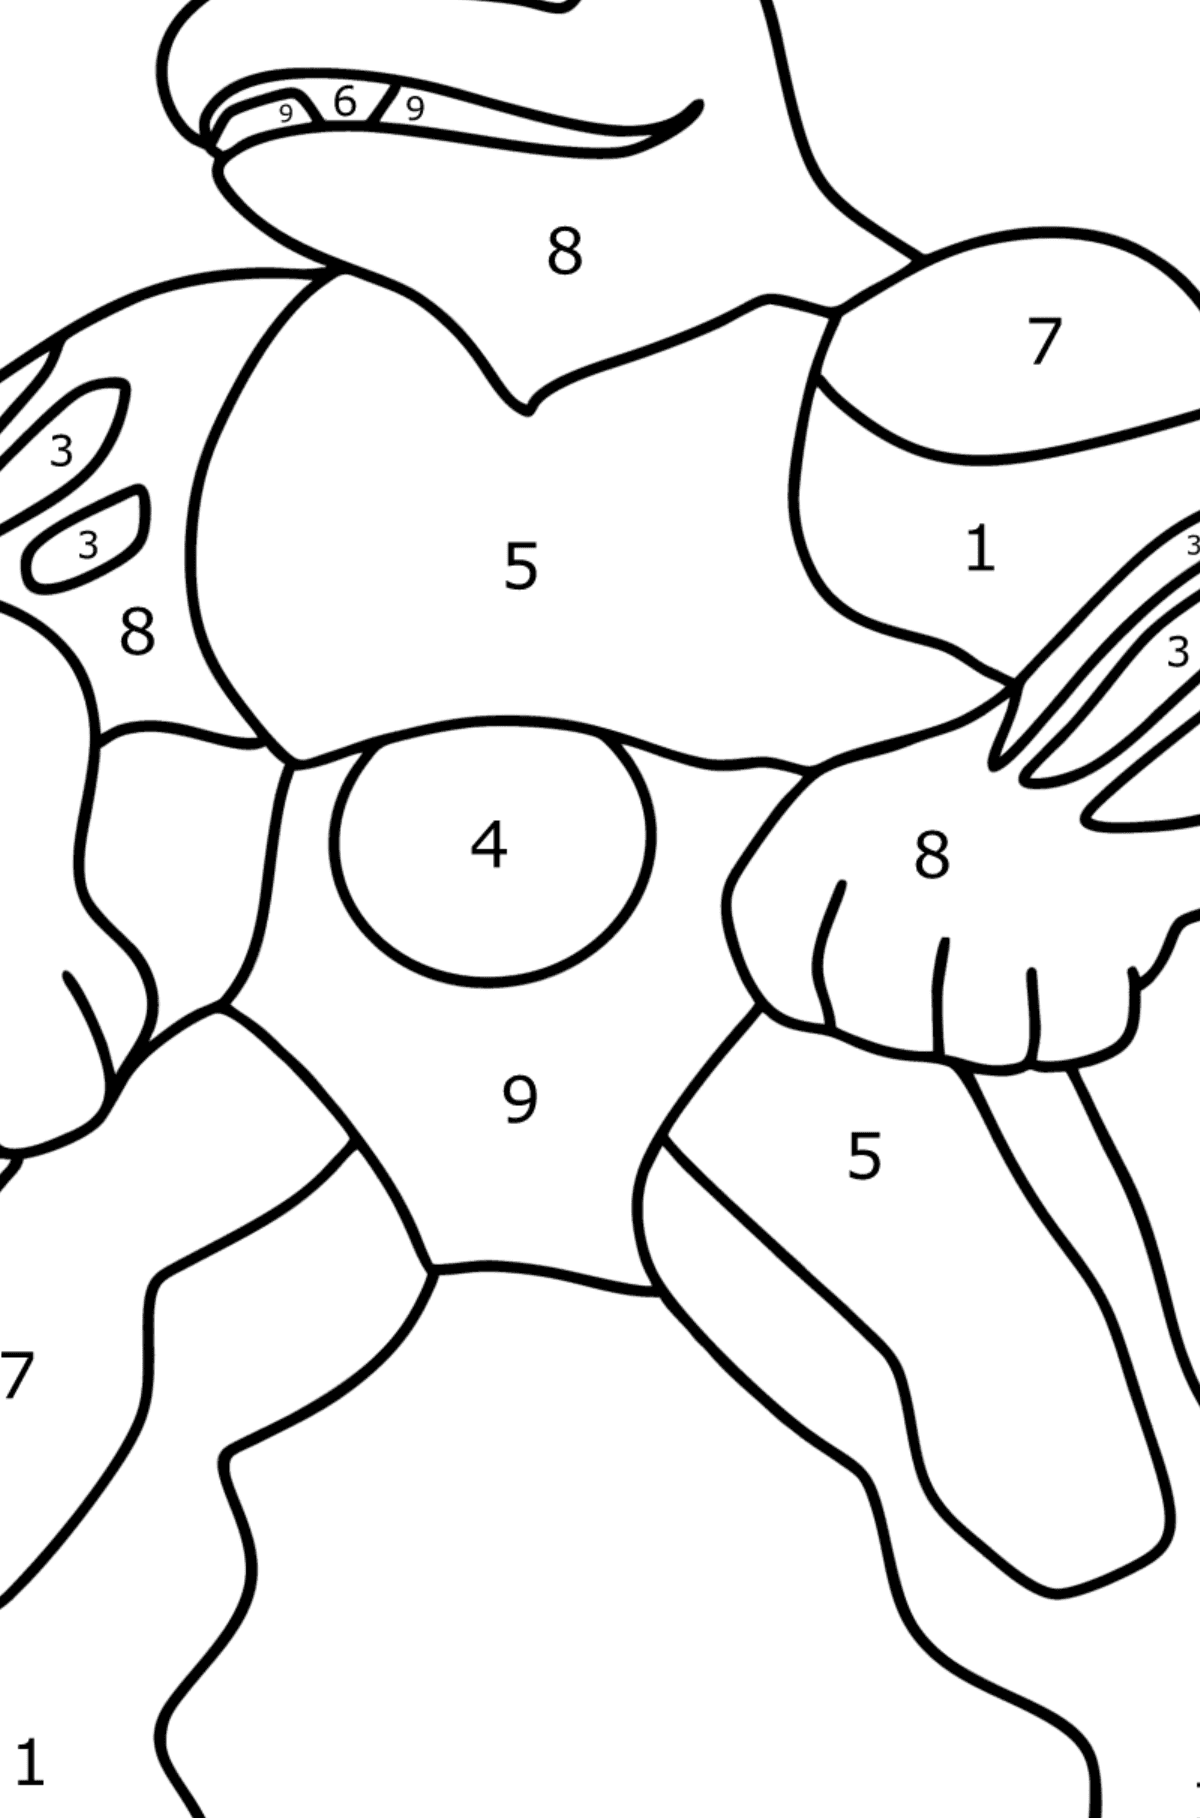 Coloring page Pokemon Go Machoke - Coloring by Numbers for Kids